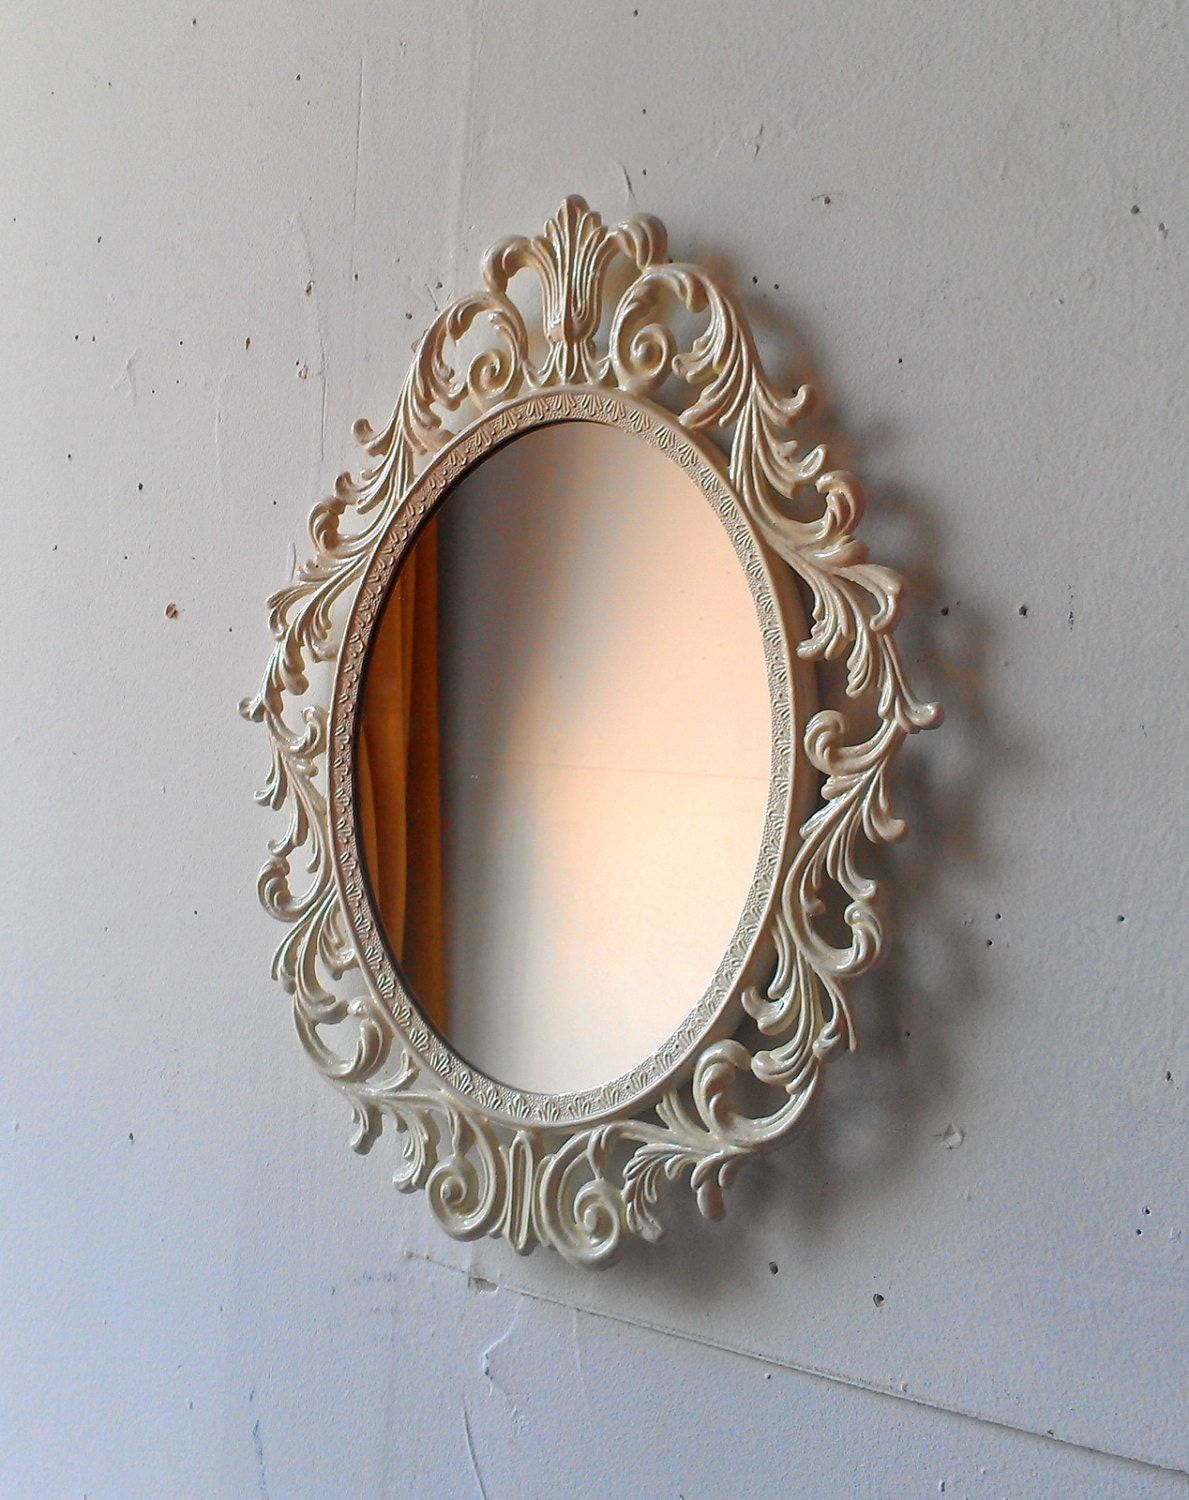 Oval Princess Mirror In Vintage Metal Filigree Frame 13 By Regarding Antique Aluminum Wall Mirrors (View 4 of 15)